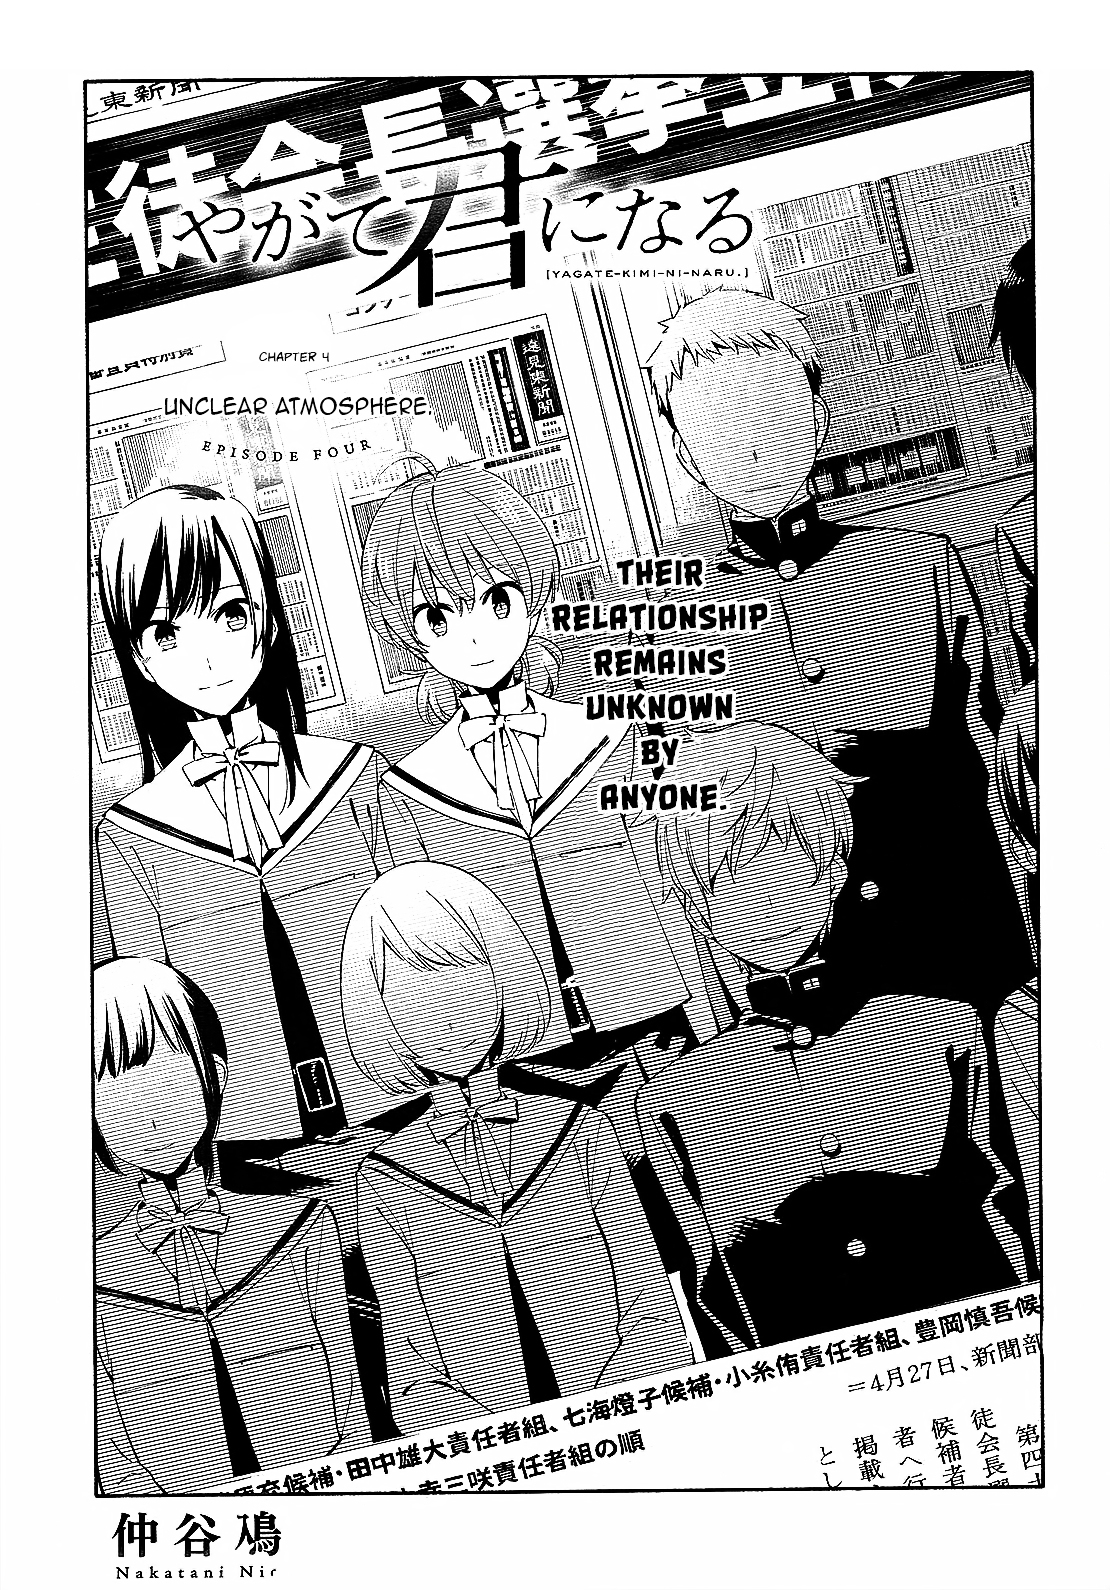 Yagate Kimi Ni Naru Vol.1 Chapter 4 : Unclear Atmosphere. - Picture 1